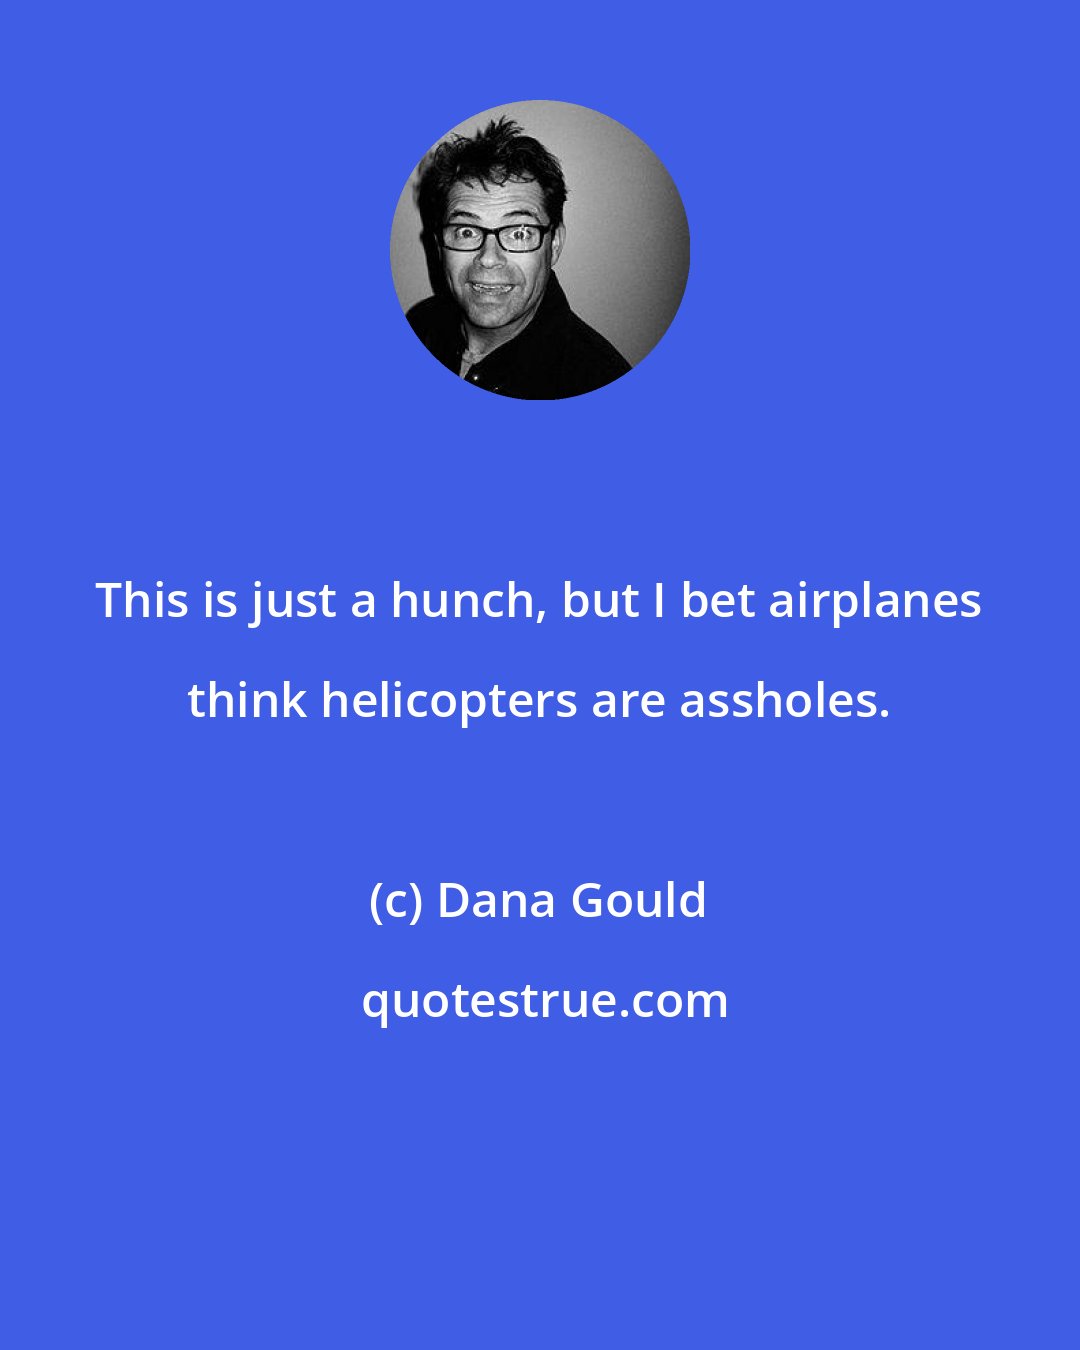 Dana Gould: This is just a hunch, but I bet airplanes think helicopters are assholes.